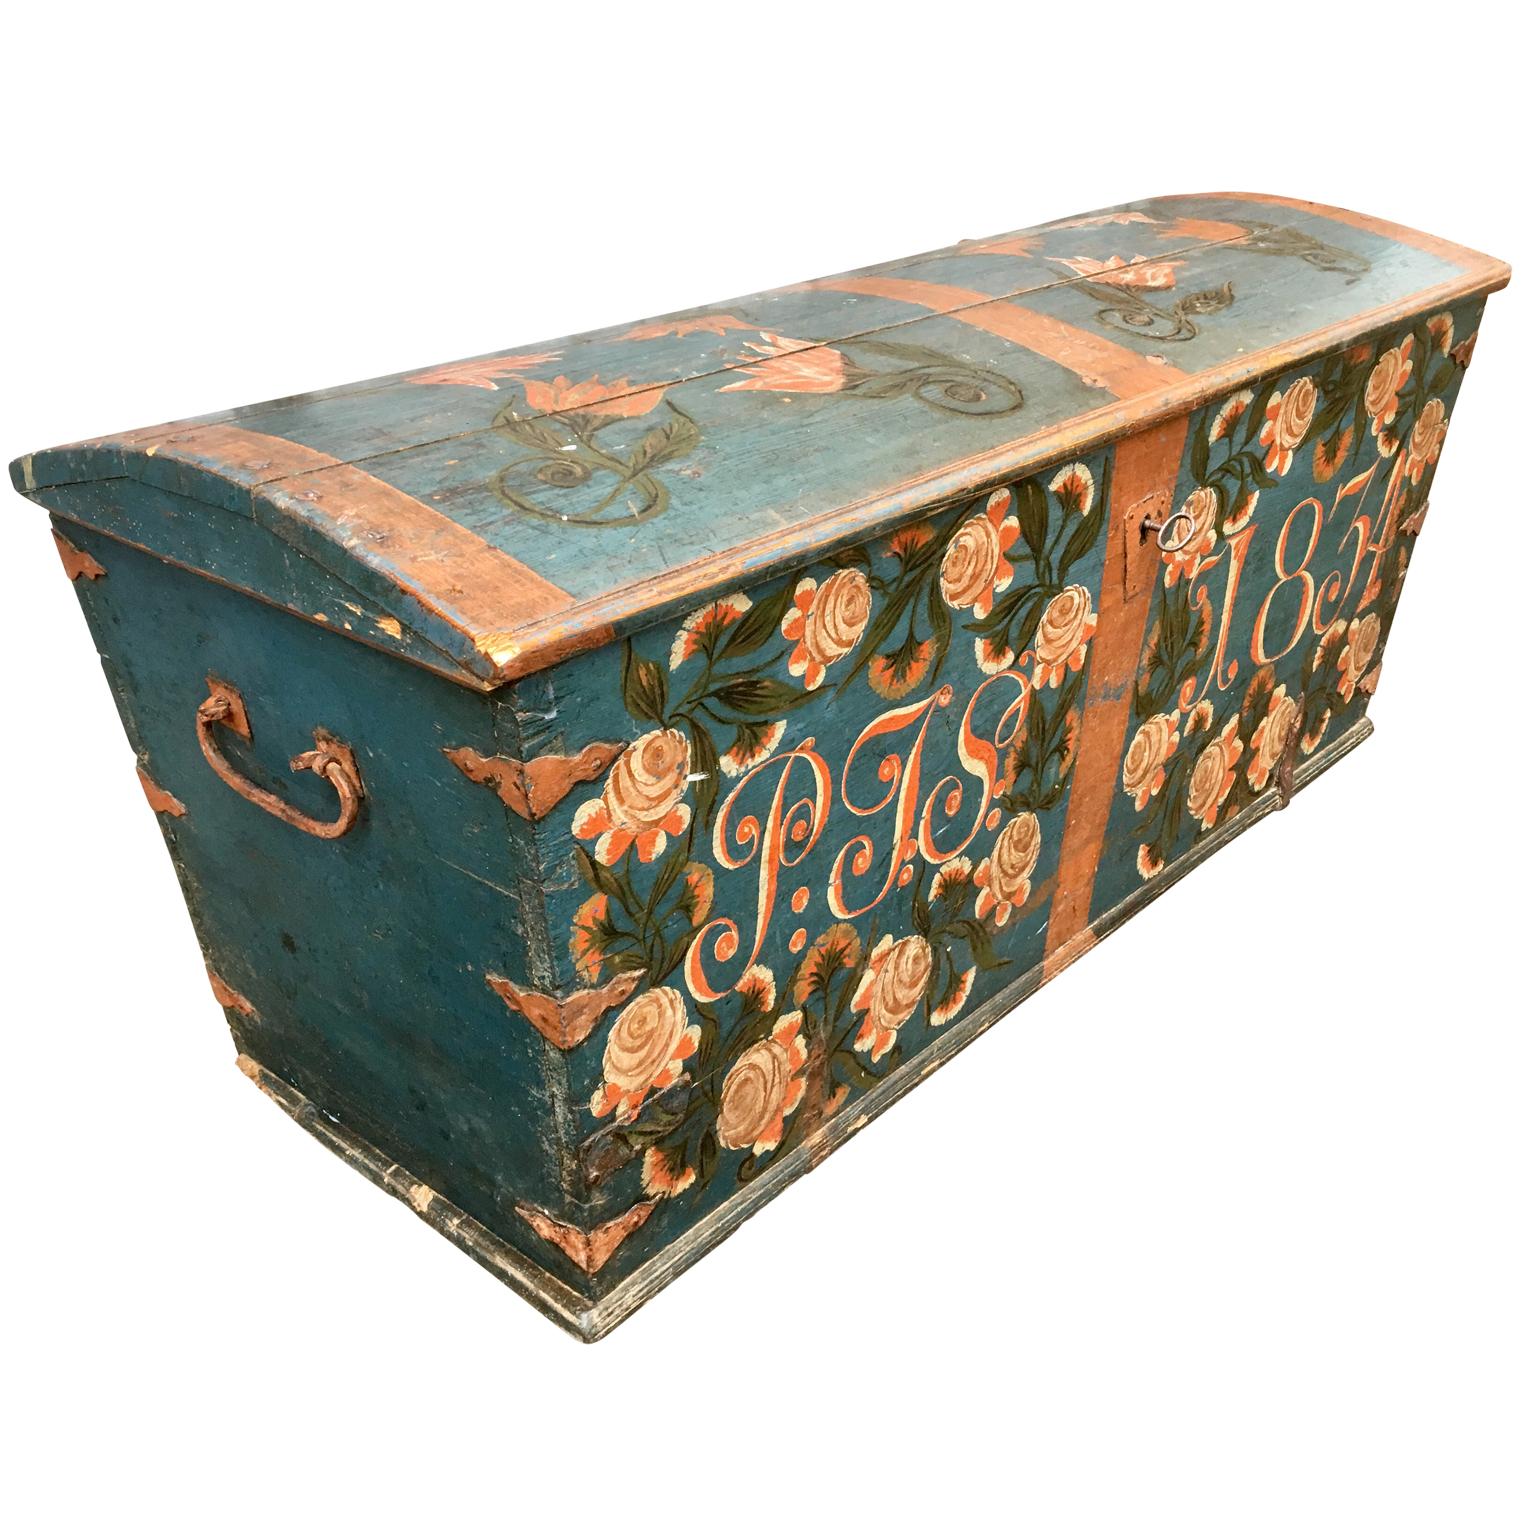 An original painted dome-top trunk from South Sweden, dated 1834. It has the initial of the father of the husband to be 